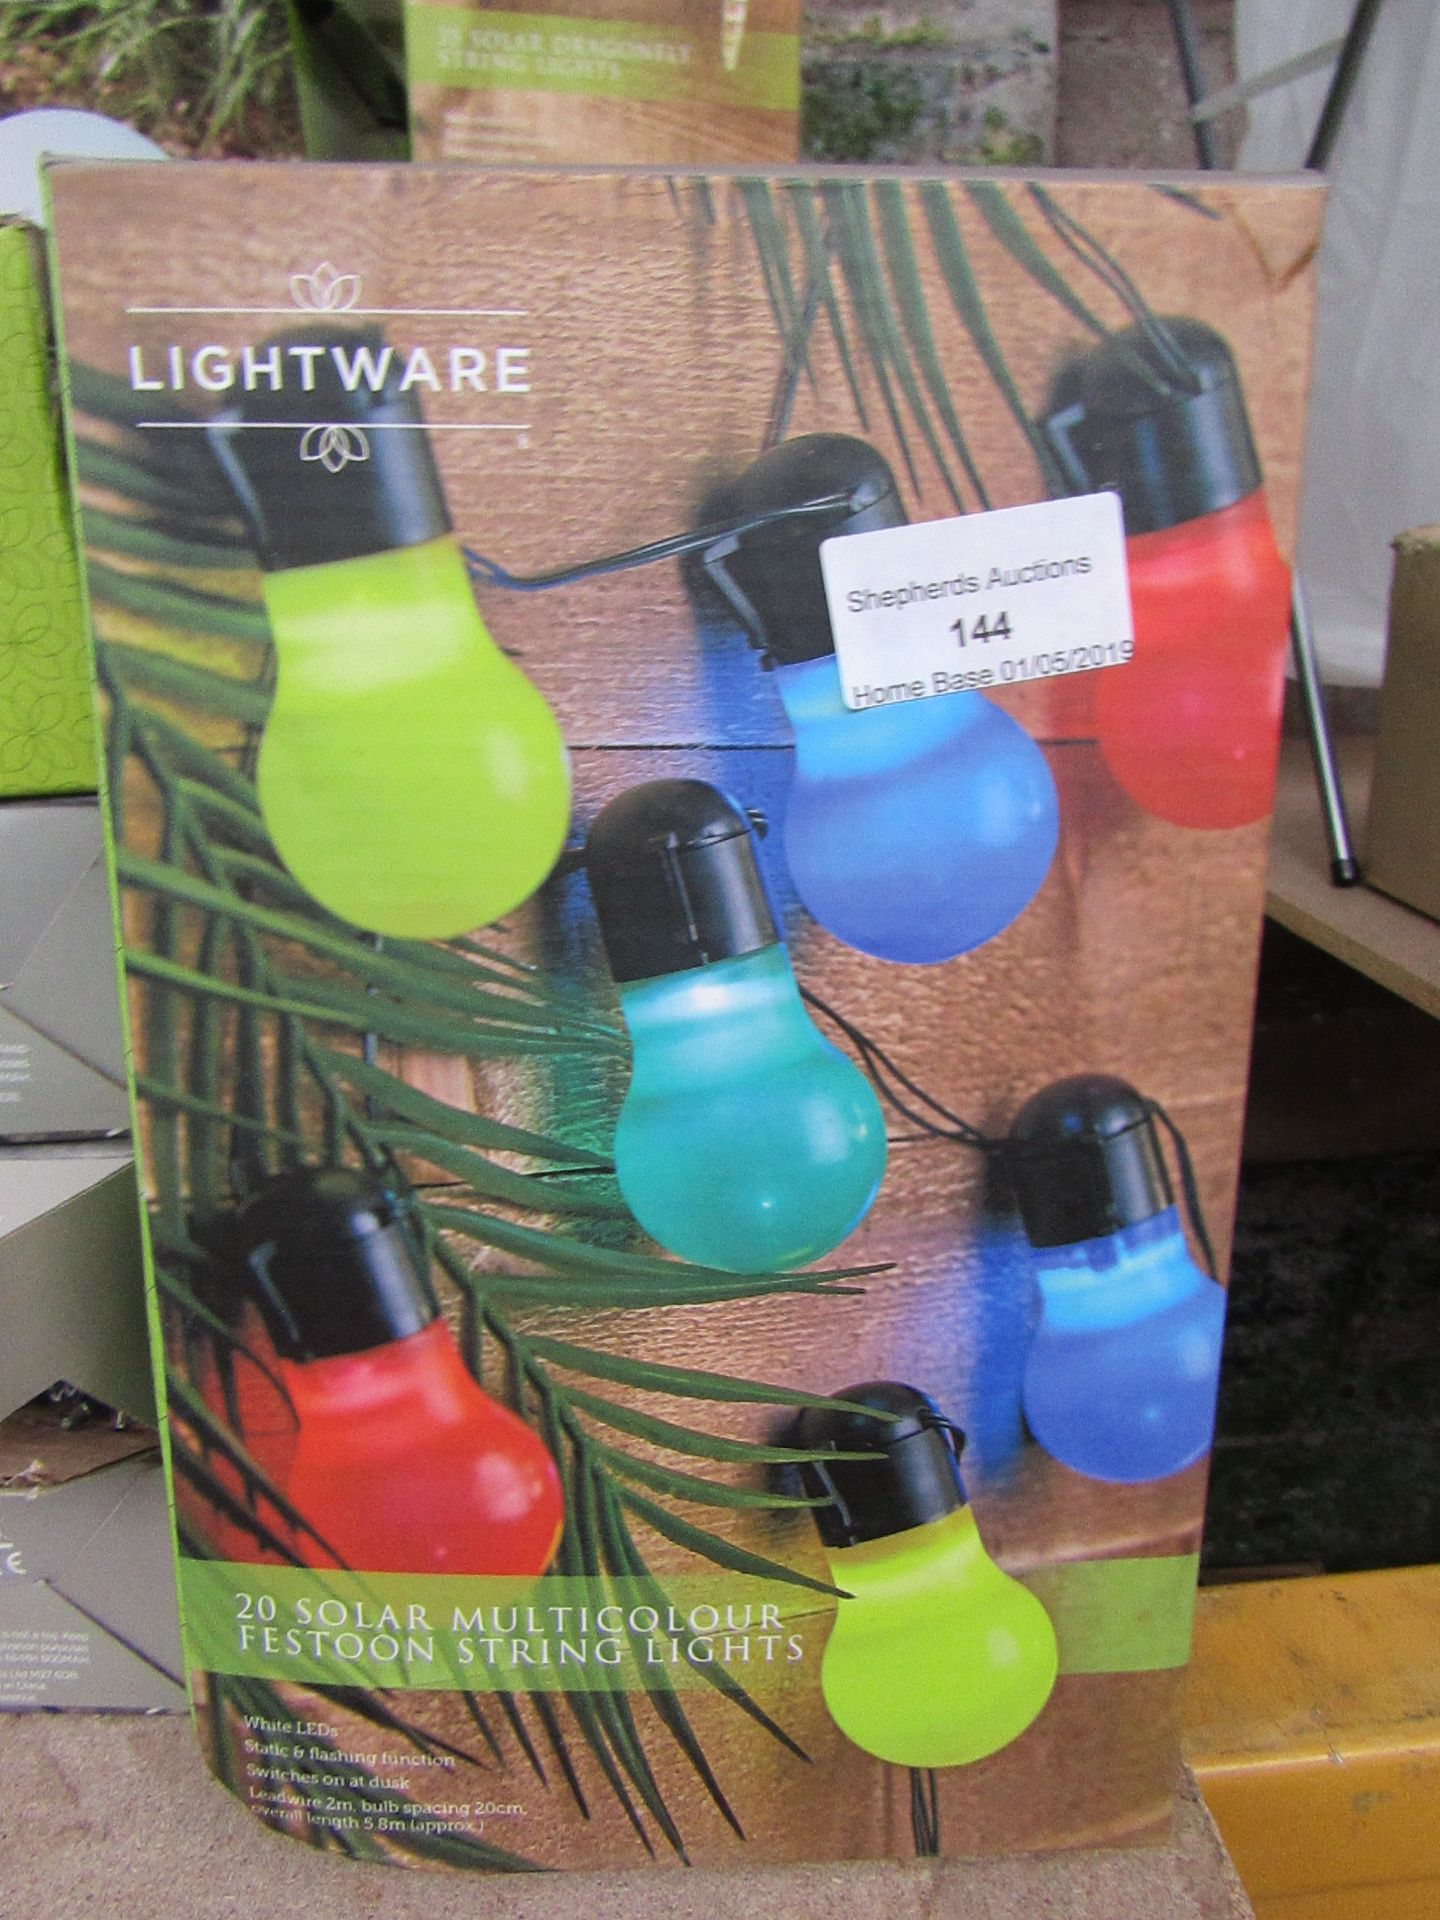 Light ware 20 solar Multicolour festoon string lights, boxed and unchecked